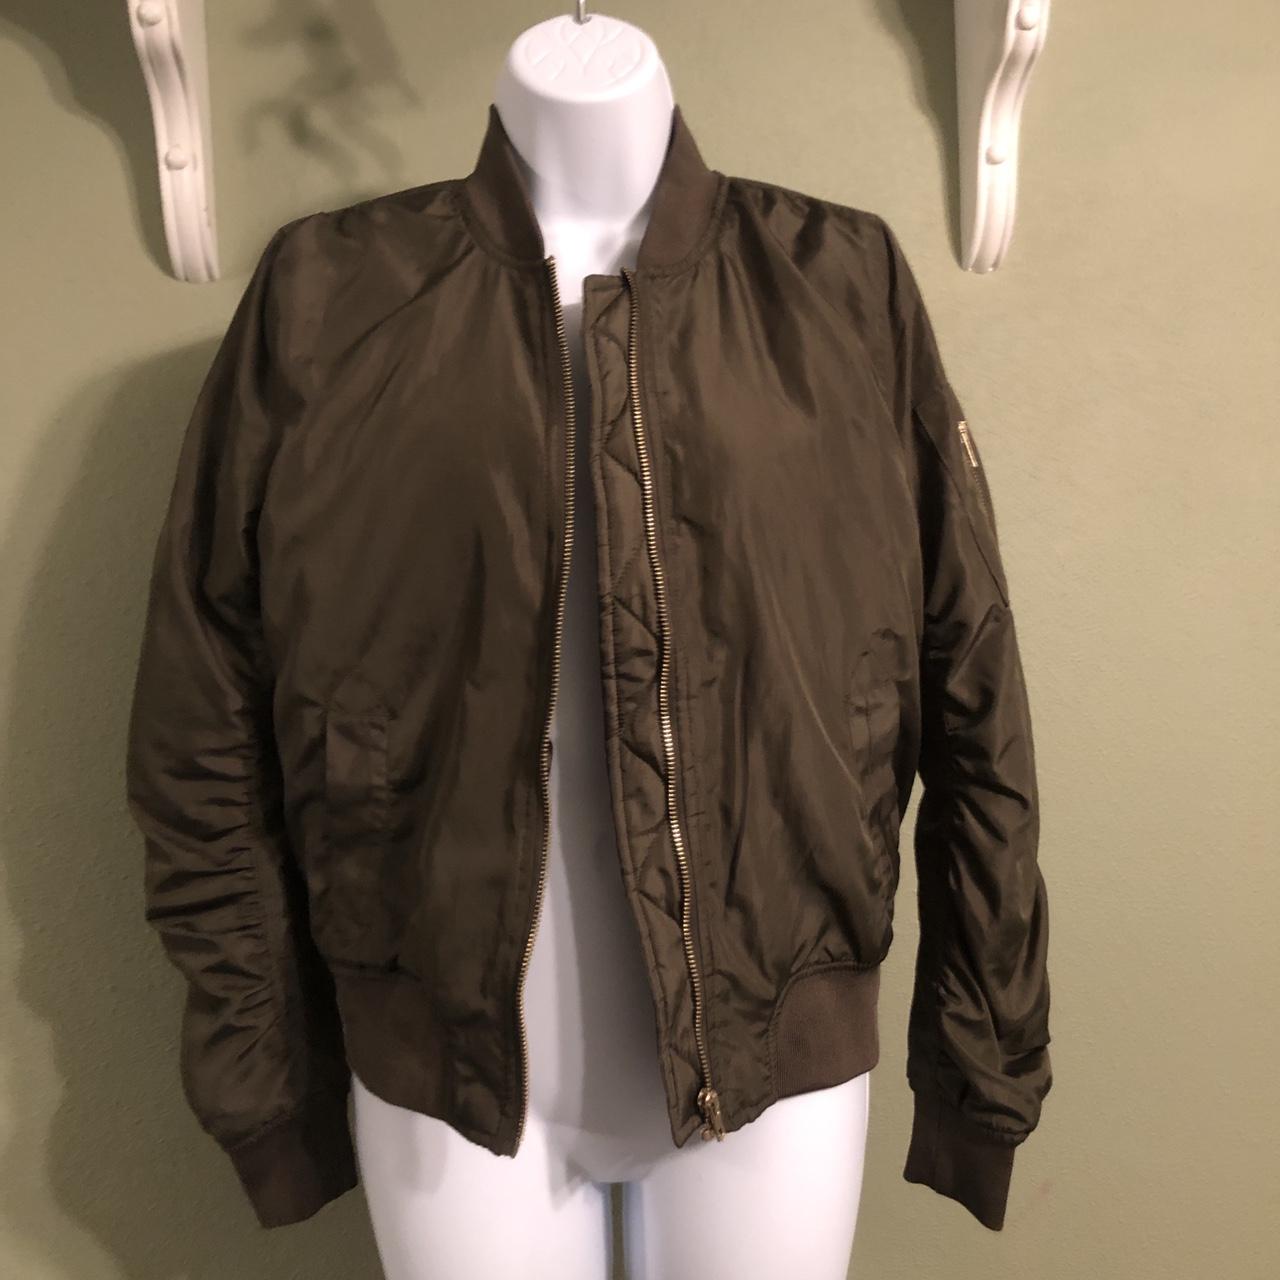 INSO Collection Olive Green Bomber Jacket No flaws... - Depop